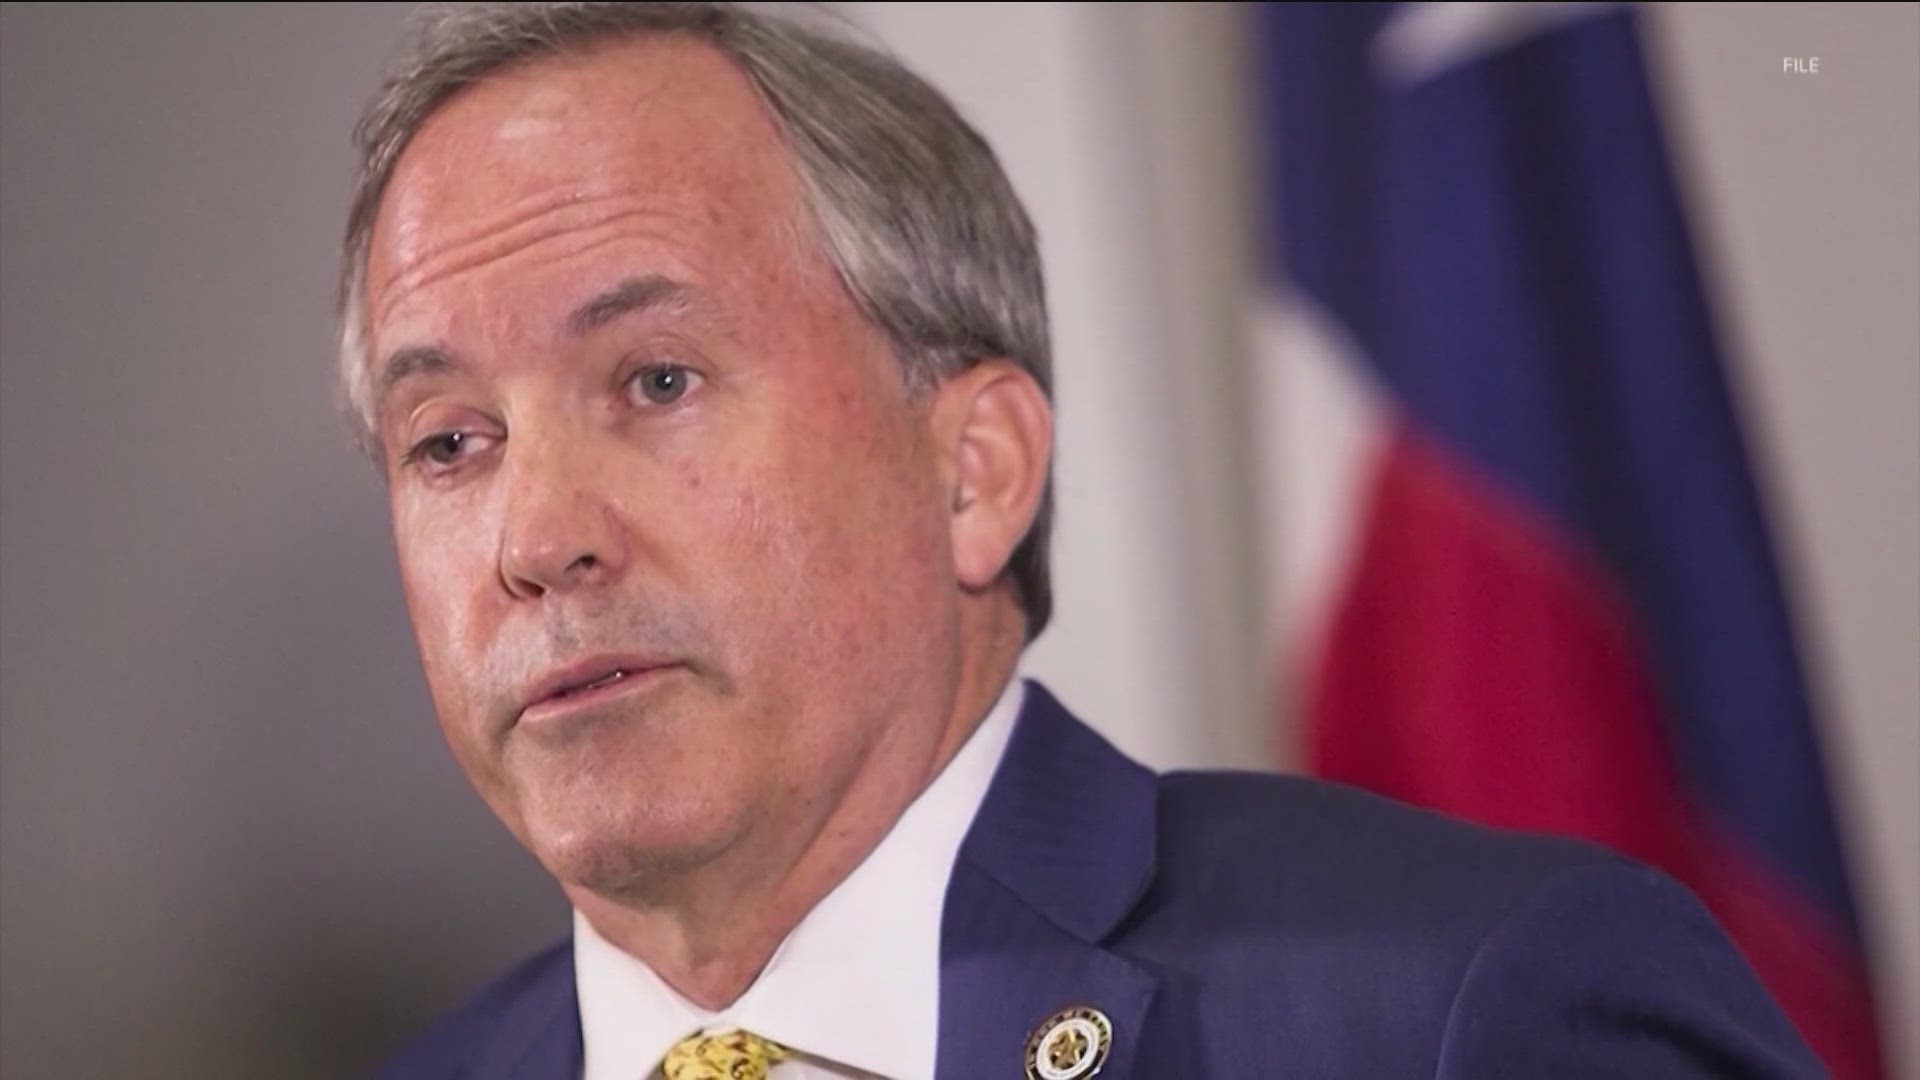 Our VERIFY team received questions about state lawyers getting paid to represent suspended Texas Attorney General Ken Paxton.